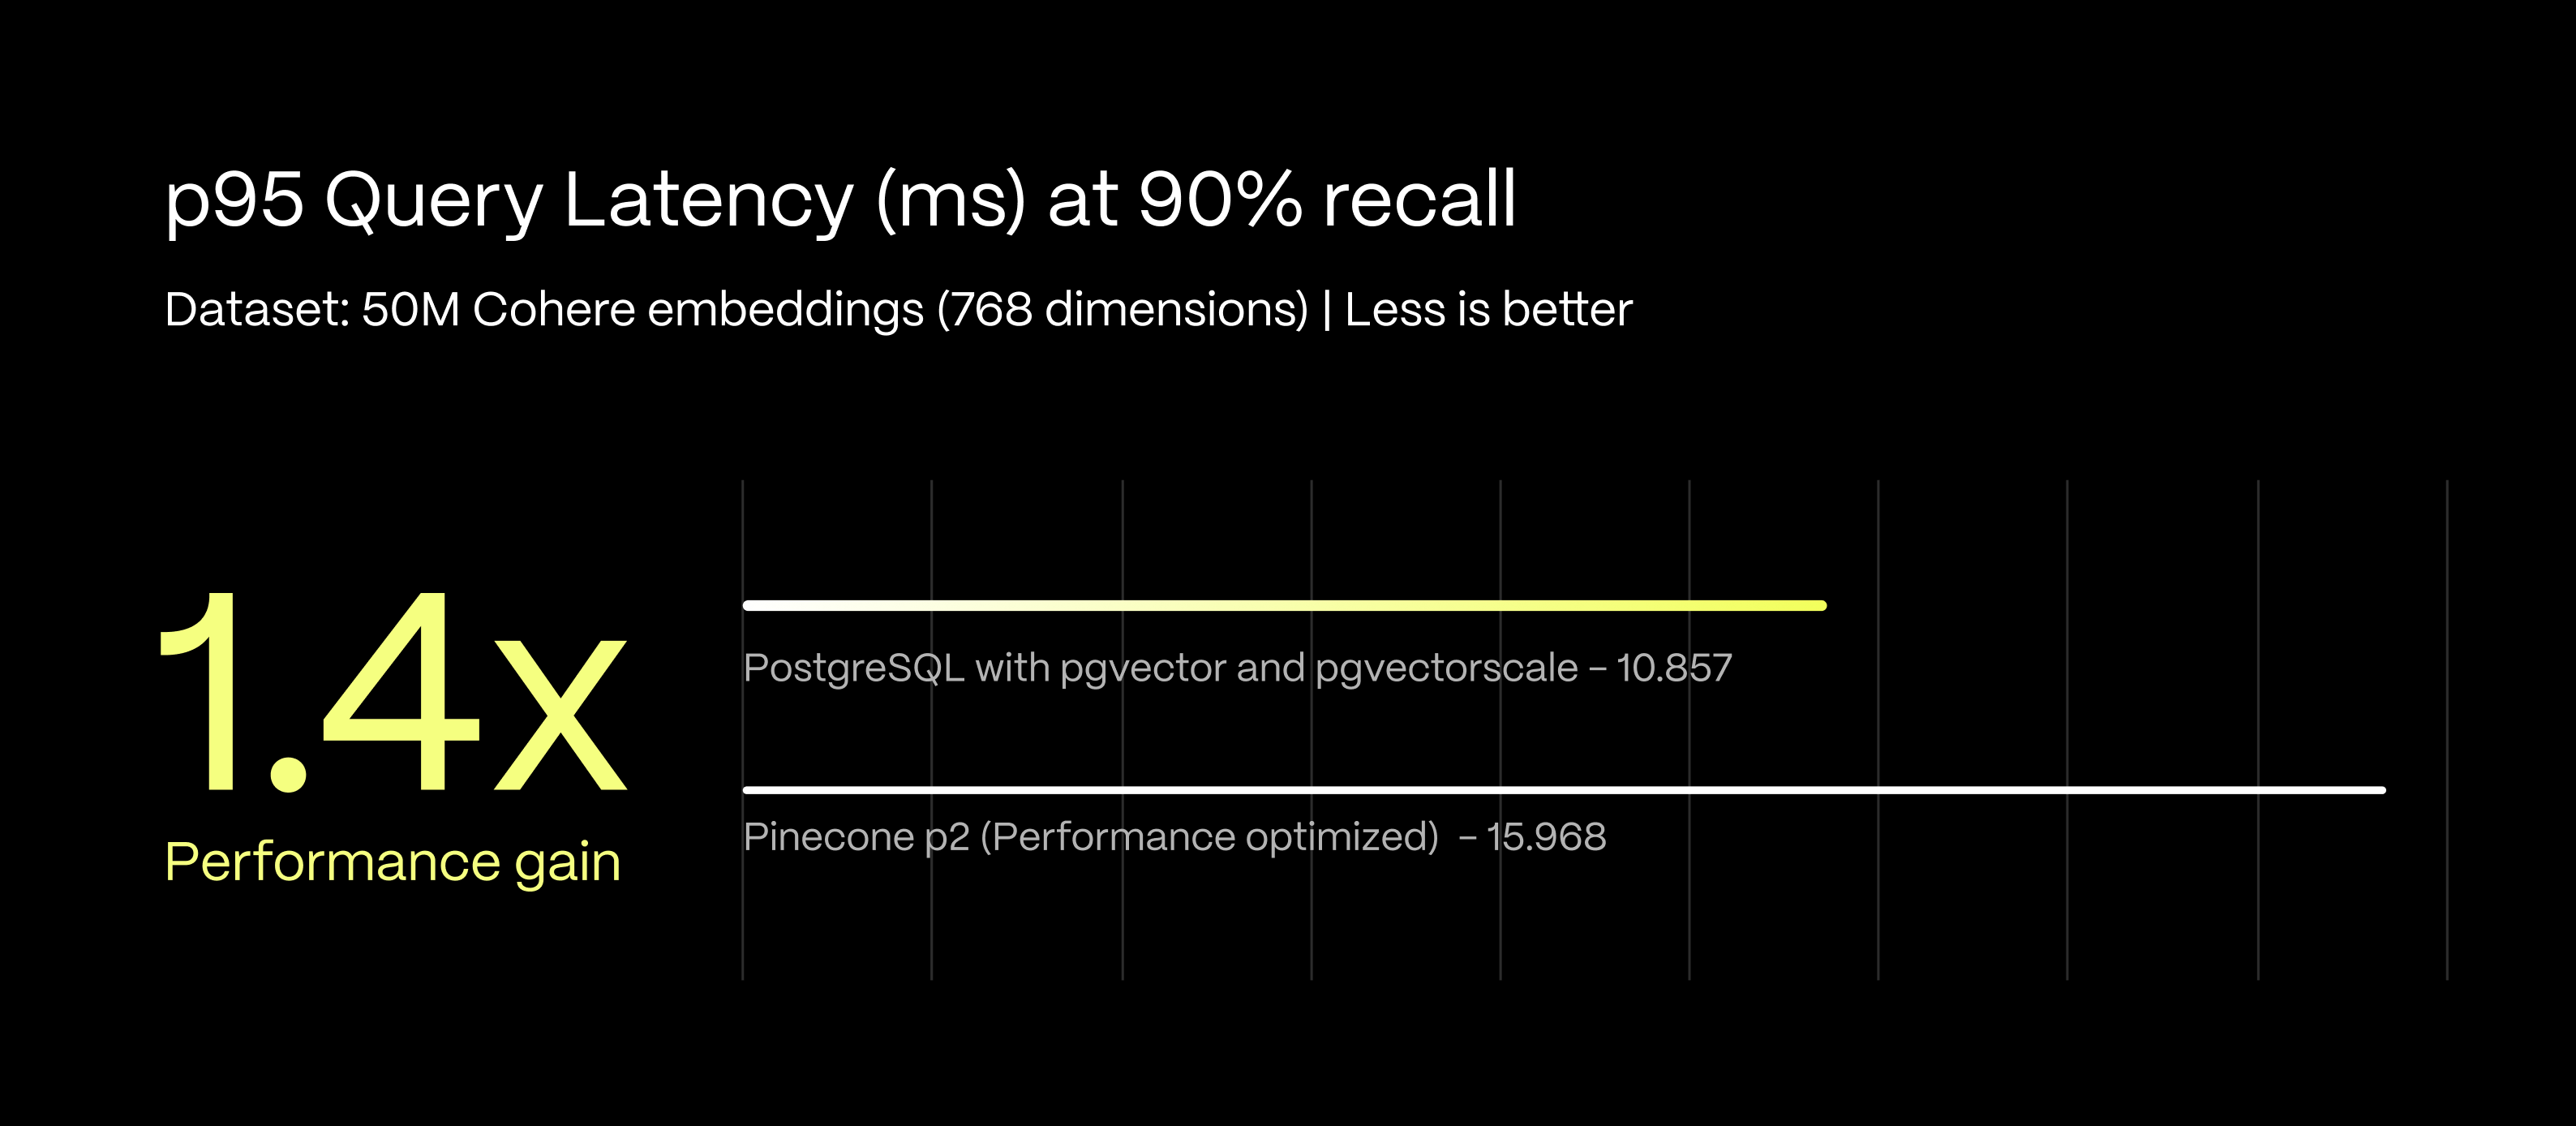 PostgreSQL with pgvector and pgvectorscale extensions outperformed Pinecone’s p1 pod-based index type, offering 1.4x lower p95 latency.